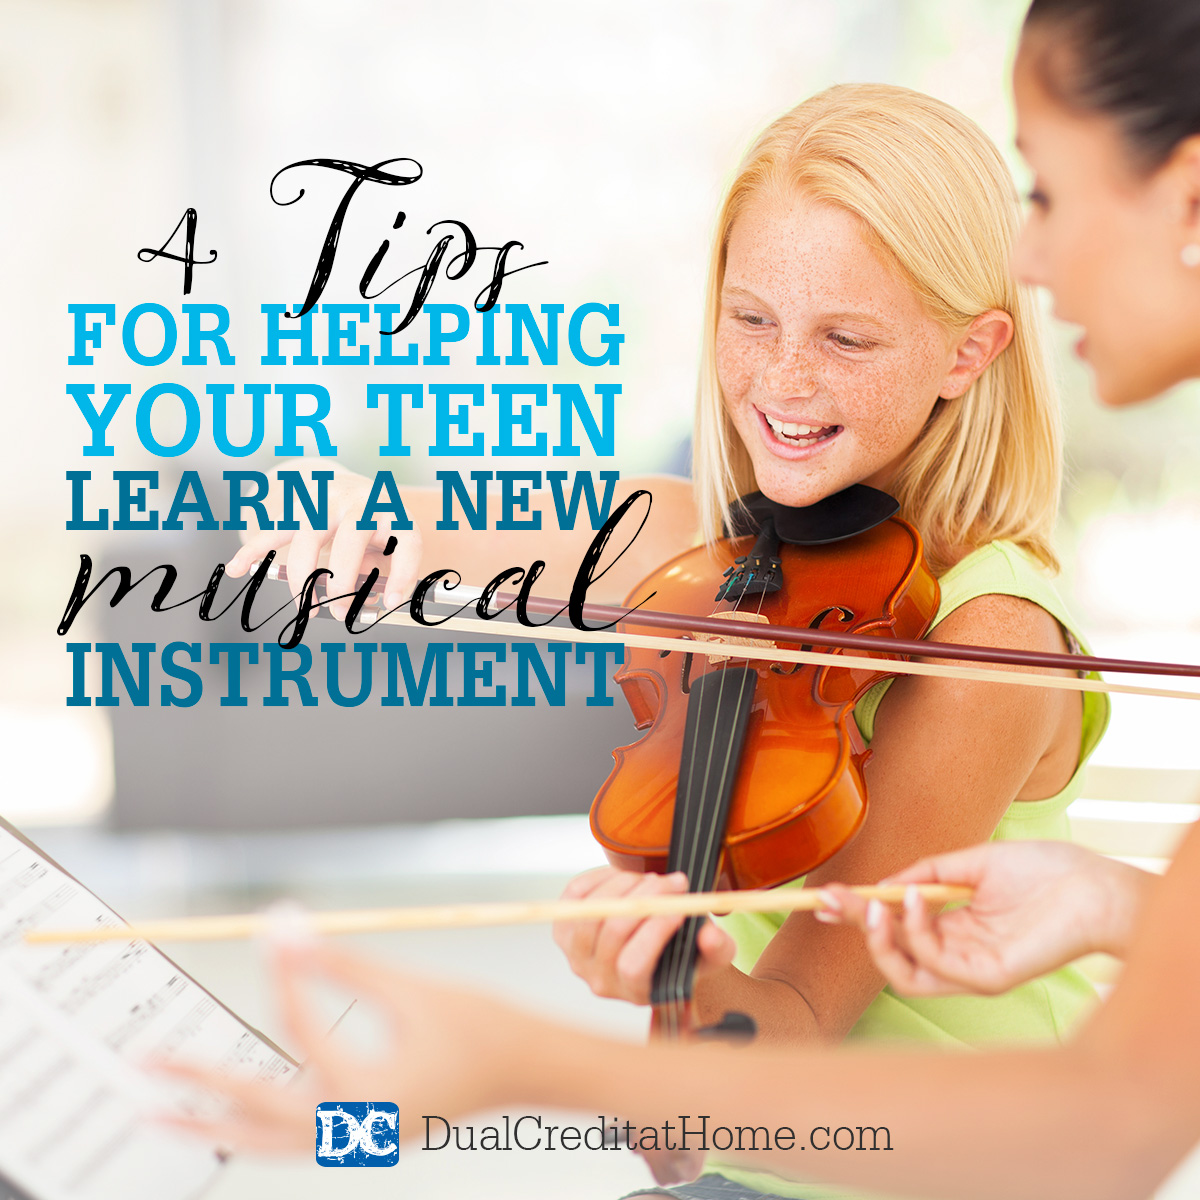 4 Tips for Helping Your Teen Learn a New Musical Instrument